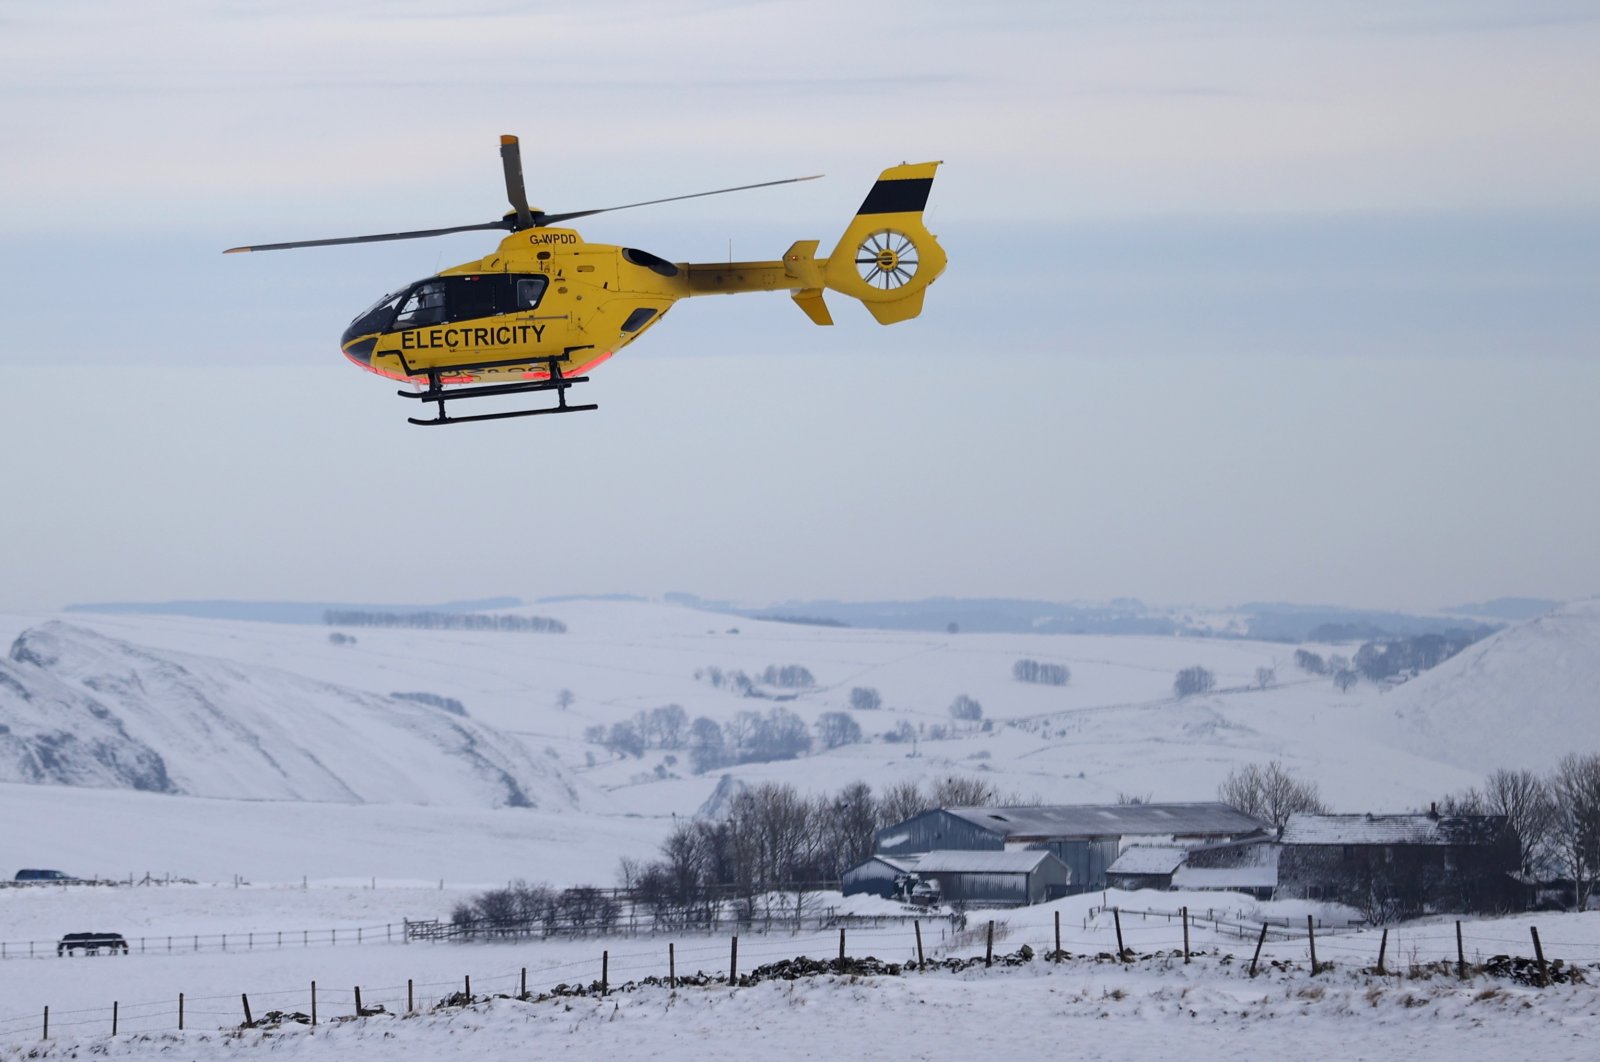 A Western Power Distribution maintenance helicopter flies over the snow-covered fields in Buxton after Storm Arwen, Buxton, Derbyshire, Britain, Nov. 29, 2021. (Reuters Photo)